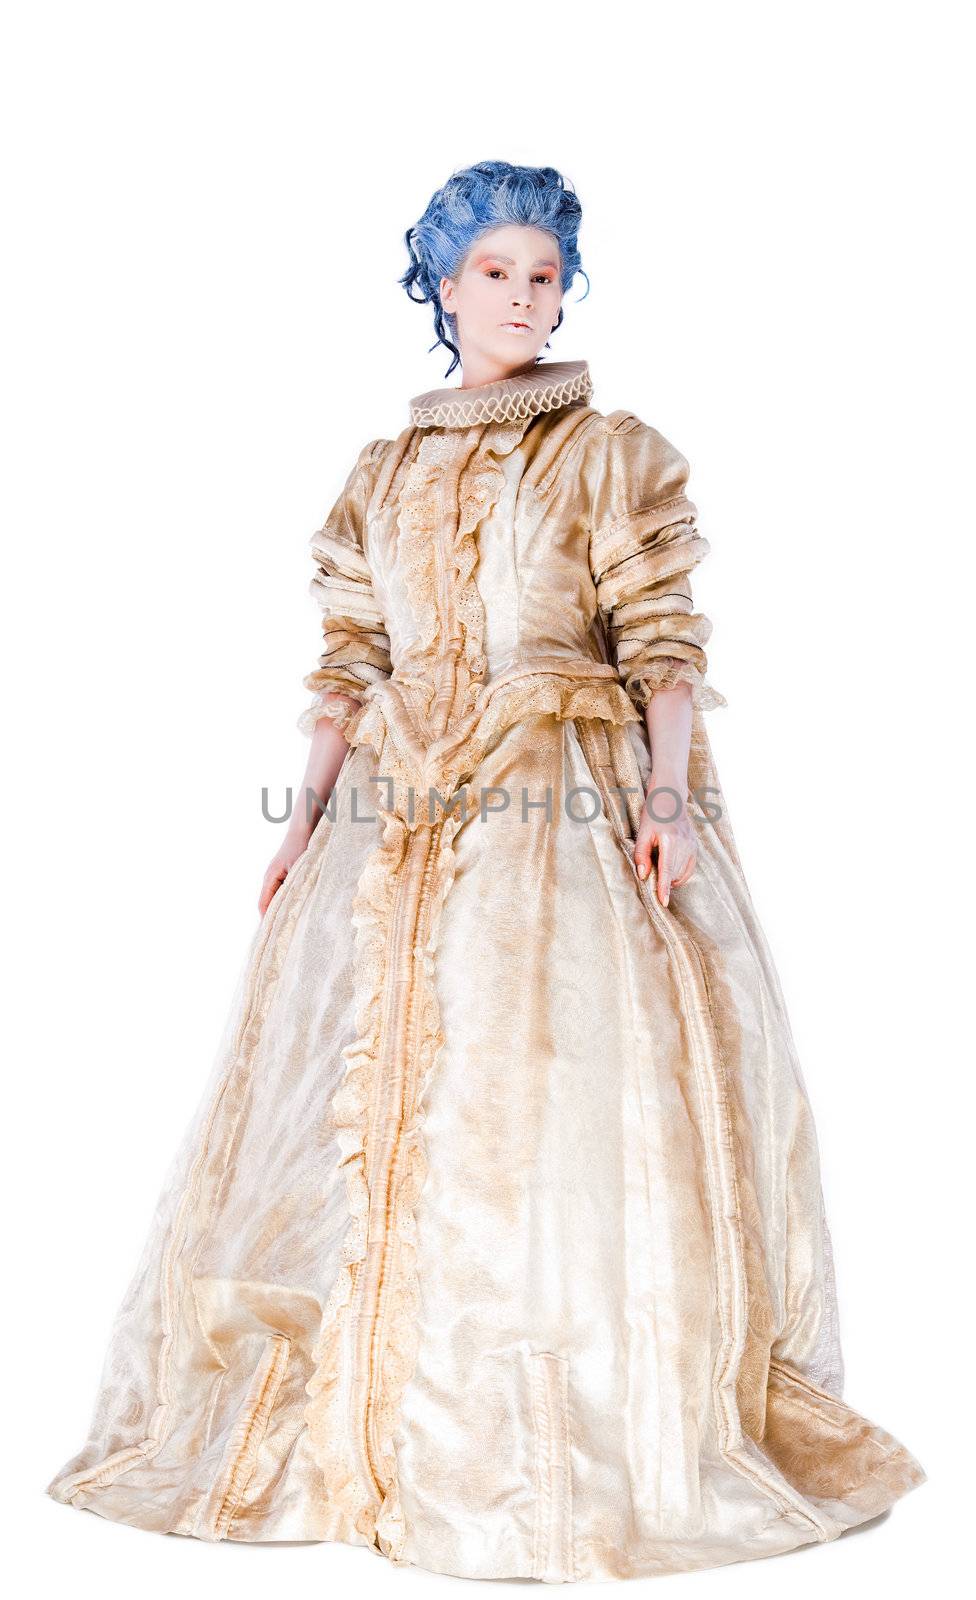 Woman with medieval dress standing and looking at camera, isolated on white